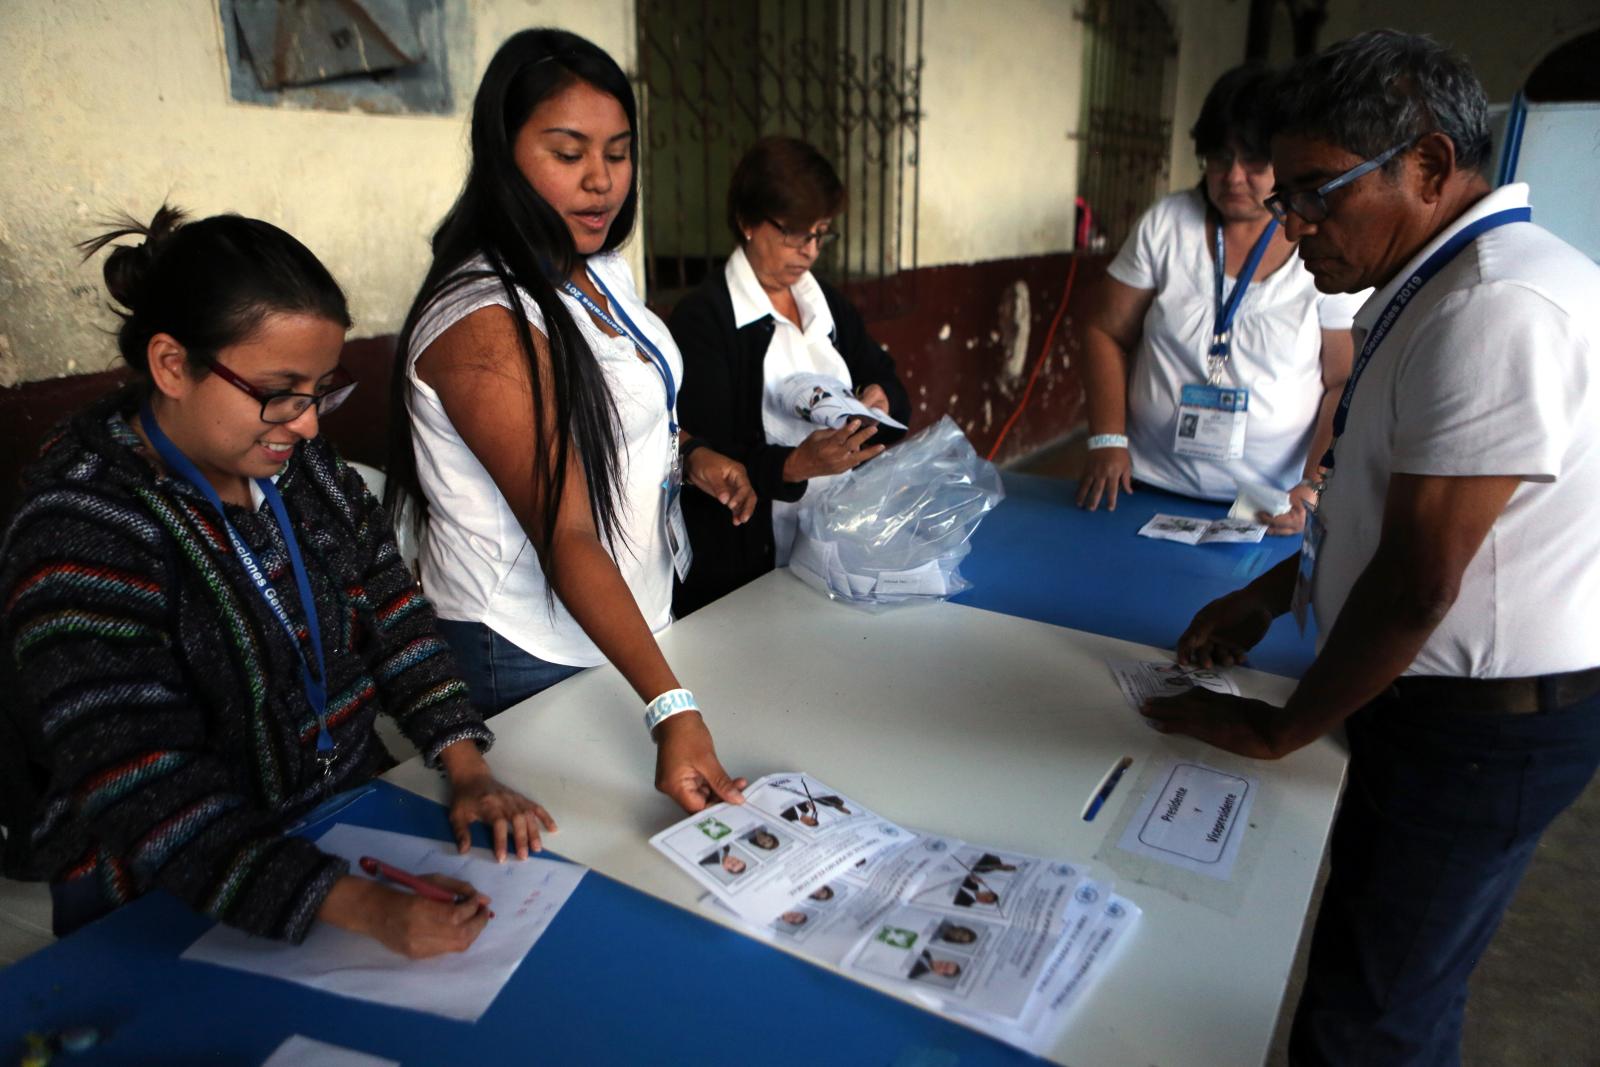 Election officials start counting marked ballots after polling stations closed during general elections in Guatemala City, Sunday, Aug. 11, 2019.